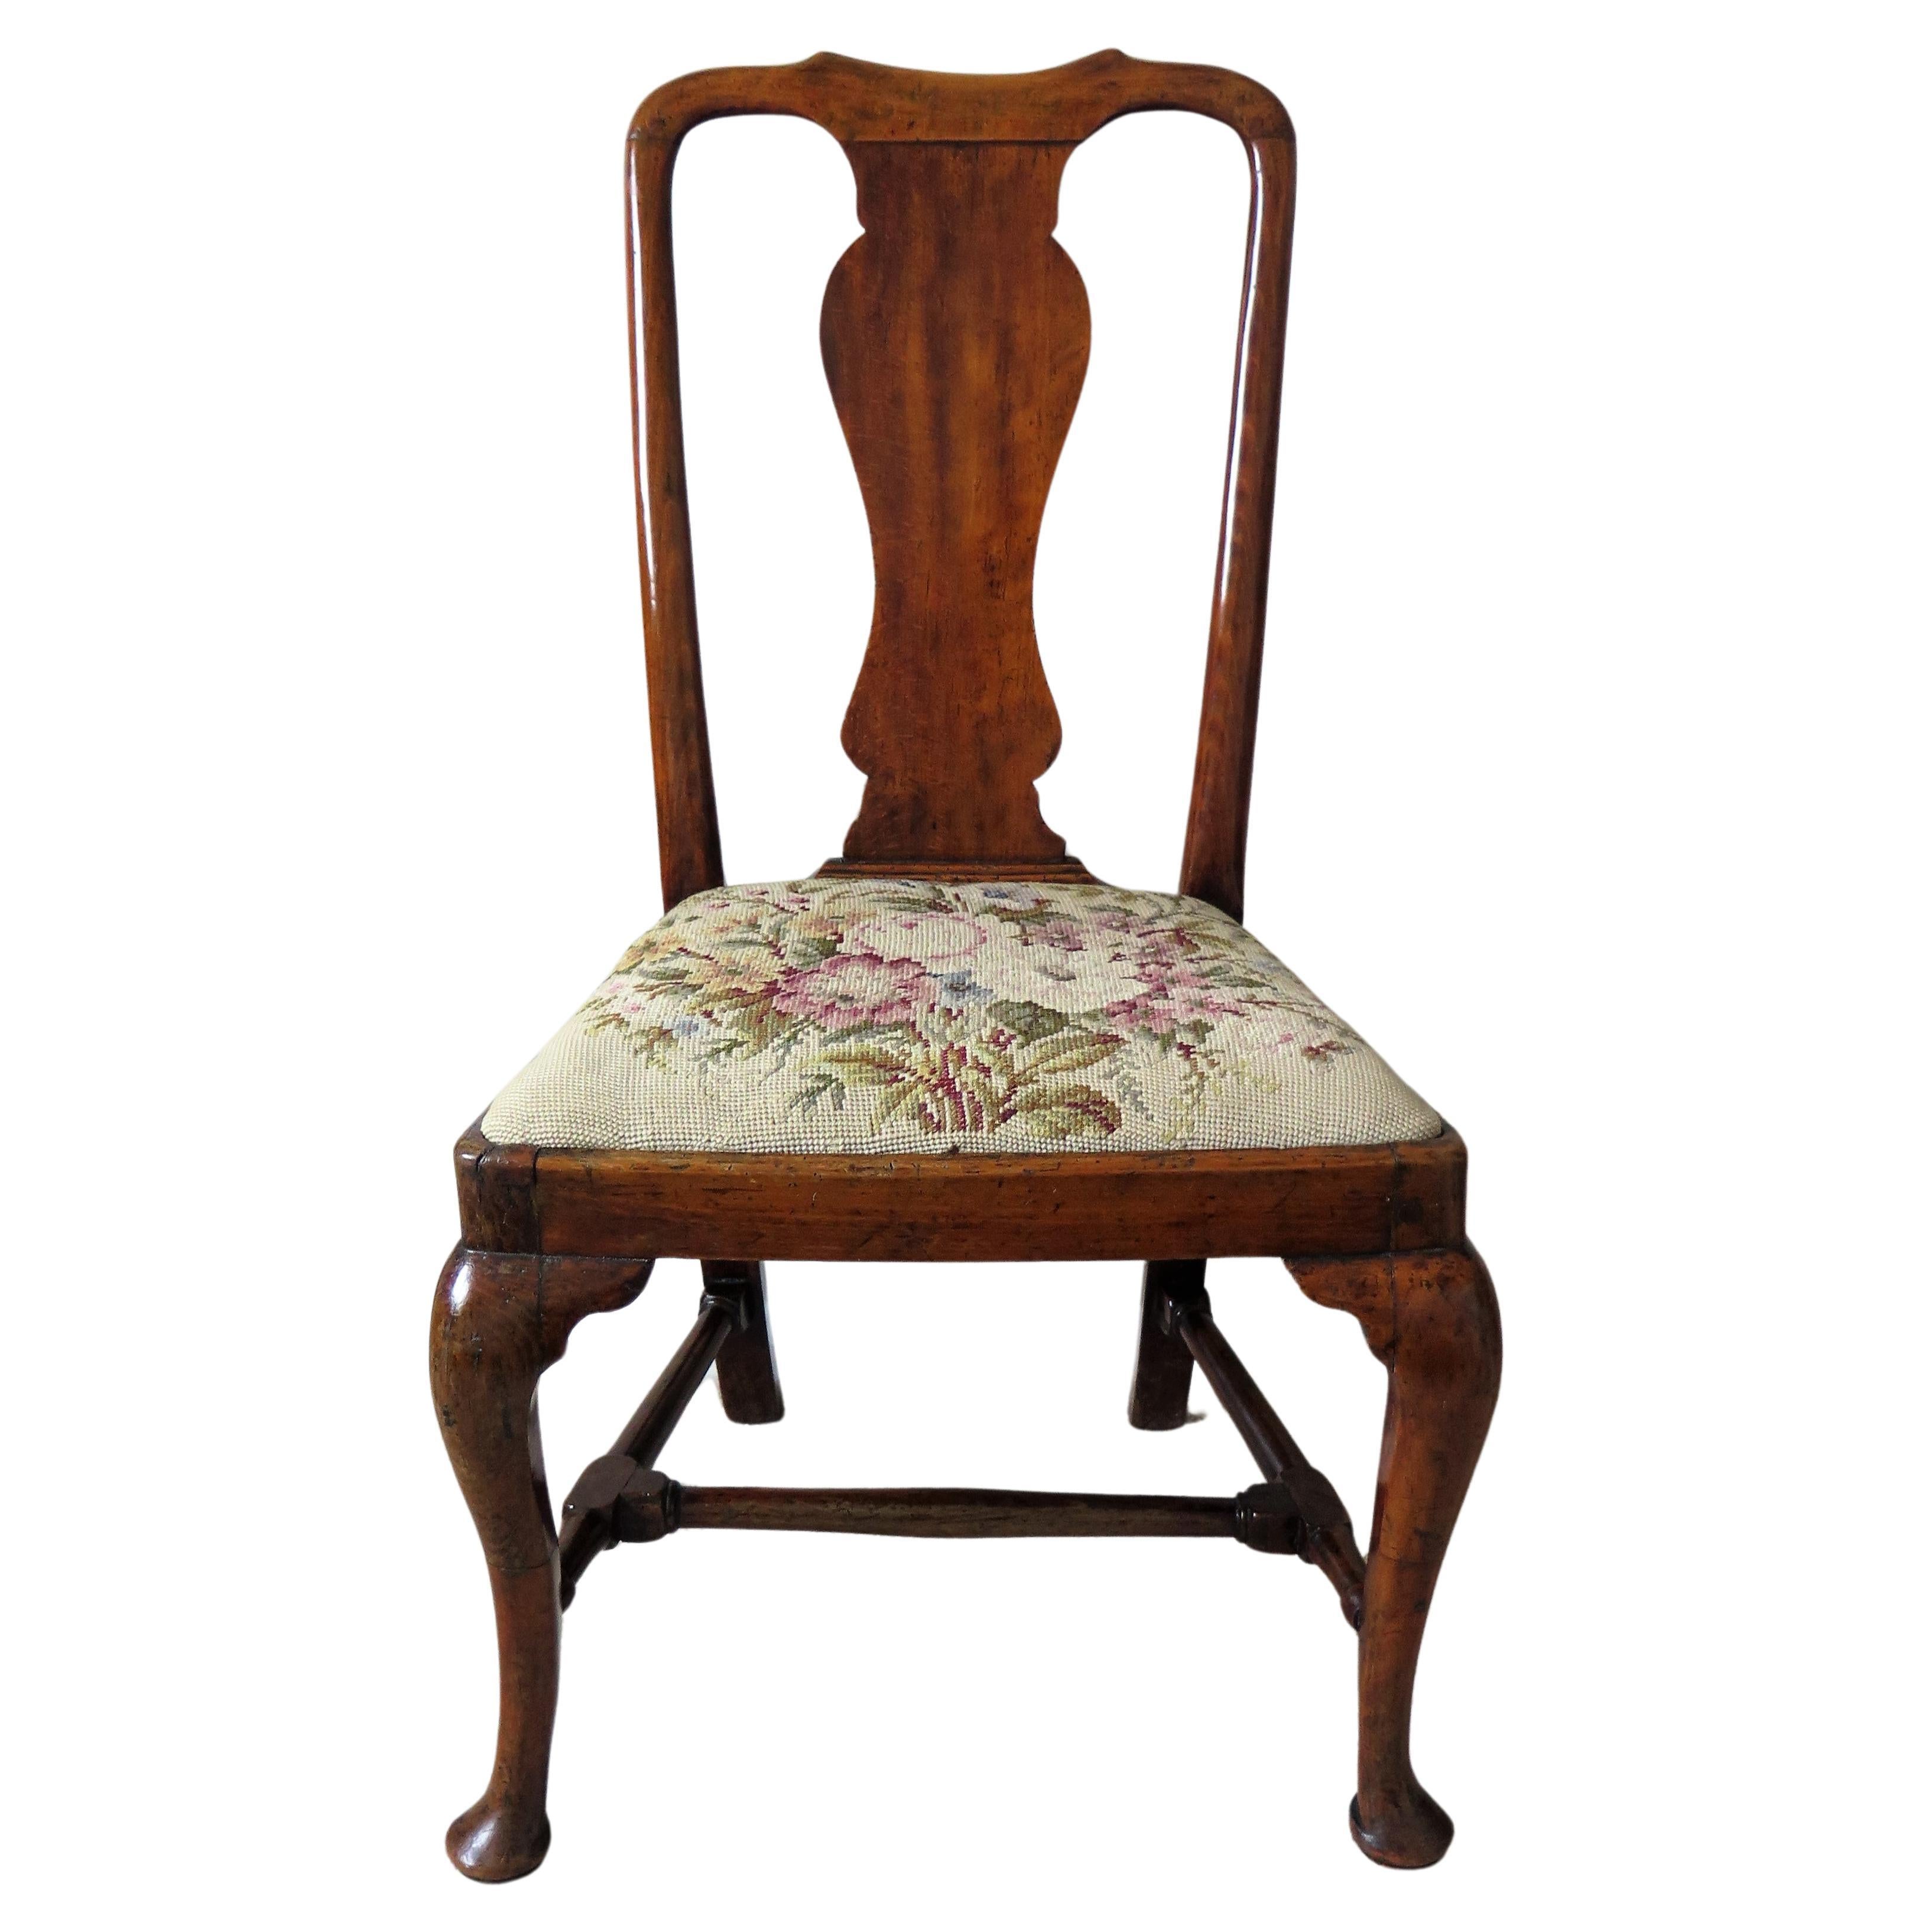 Queen Anne Period Walnut Chair Cabriole Legs and Stretchers, English circa 1700 For Sale